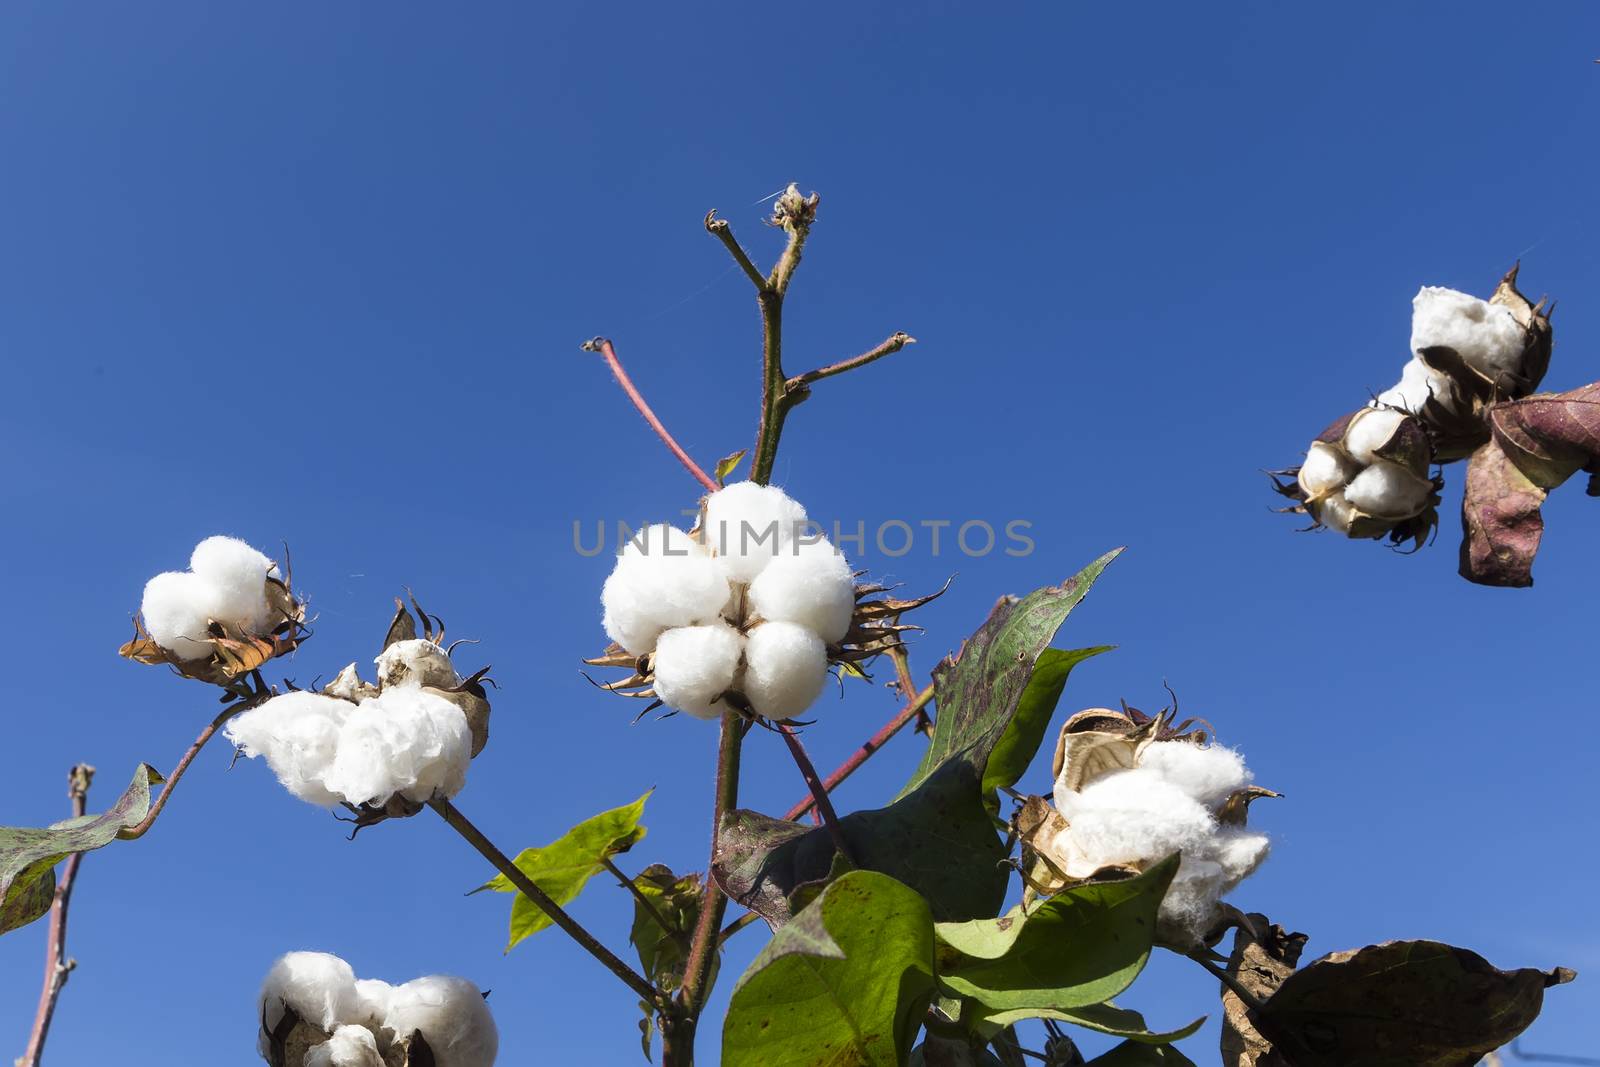 Cotton fields white with ripe cotton ready for harvesting by ververidis